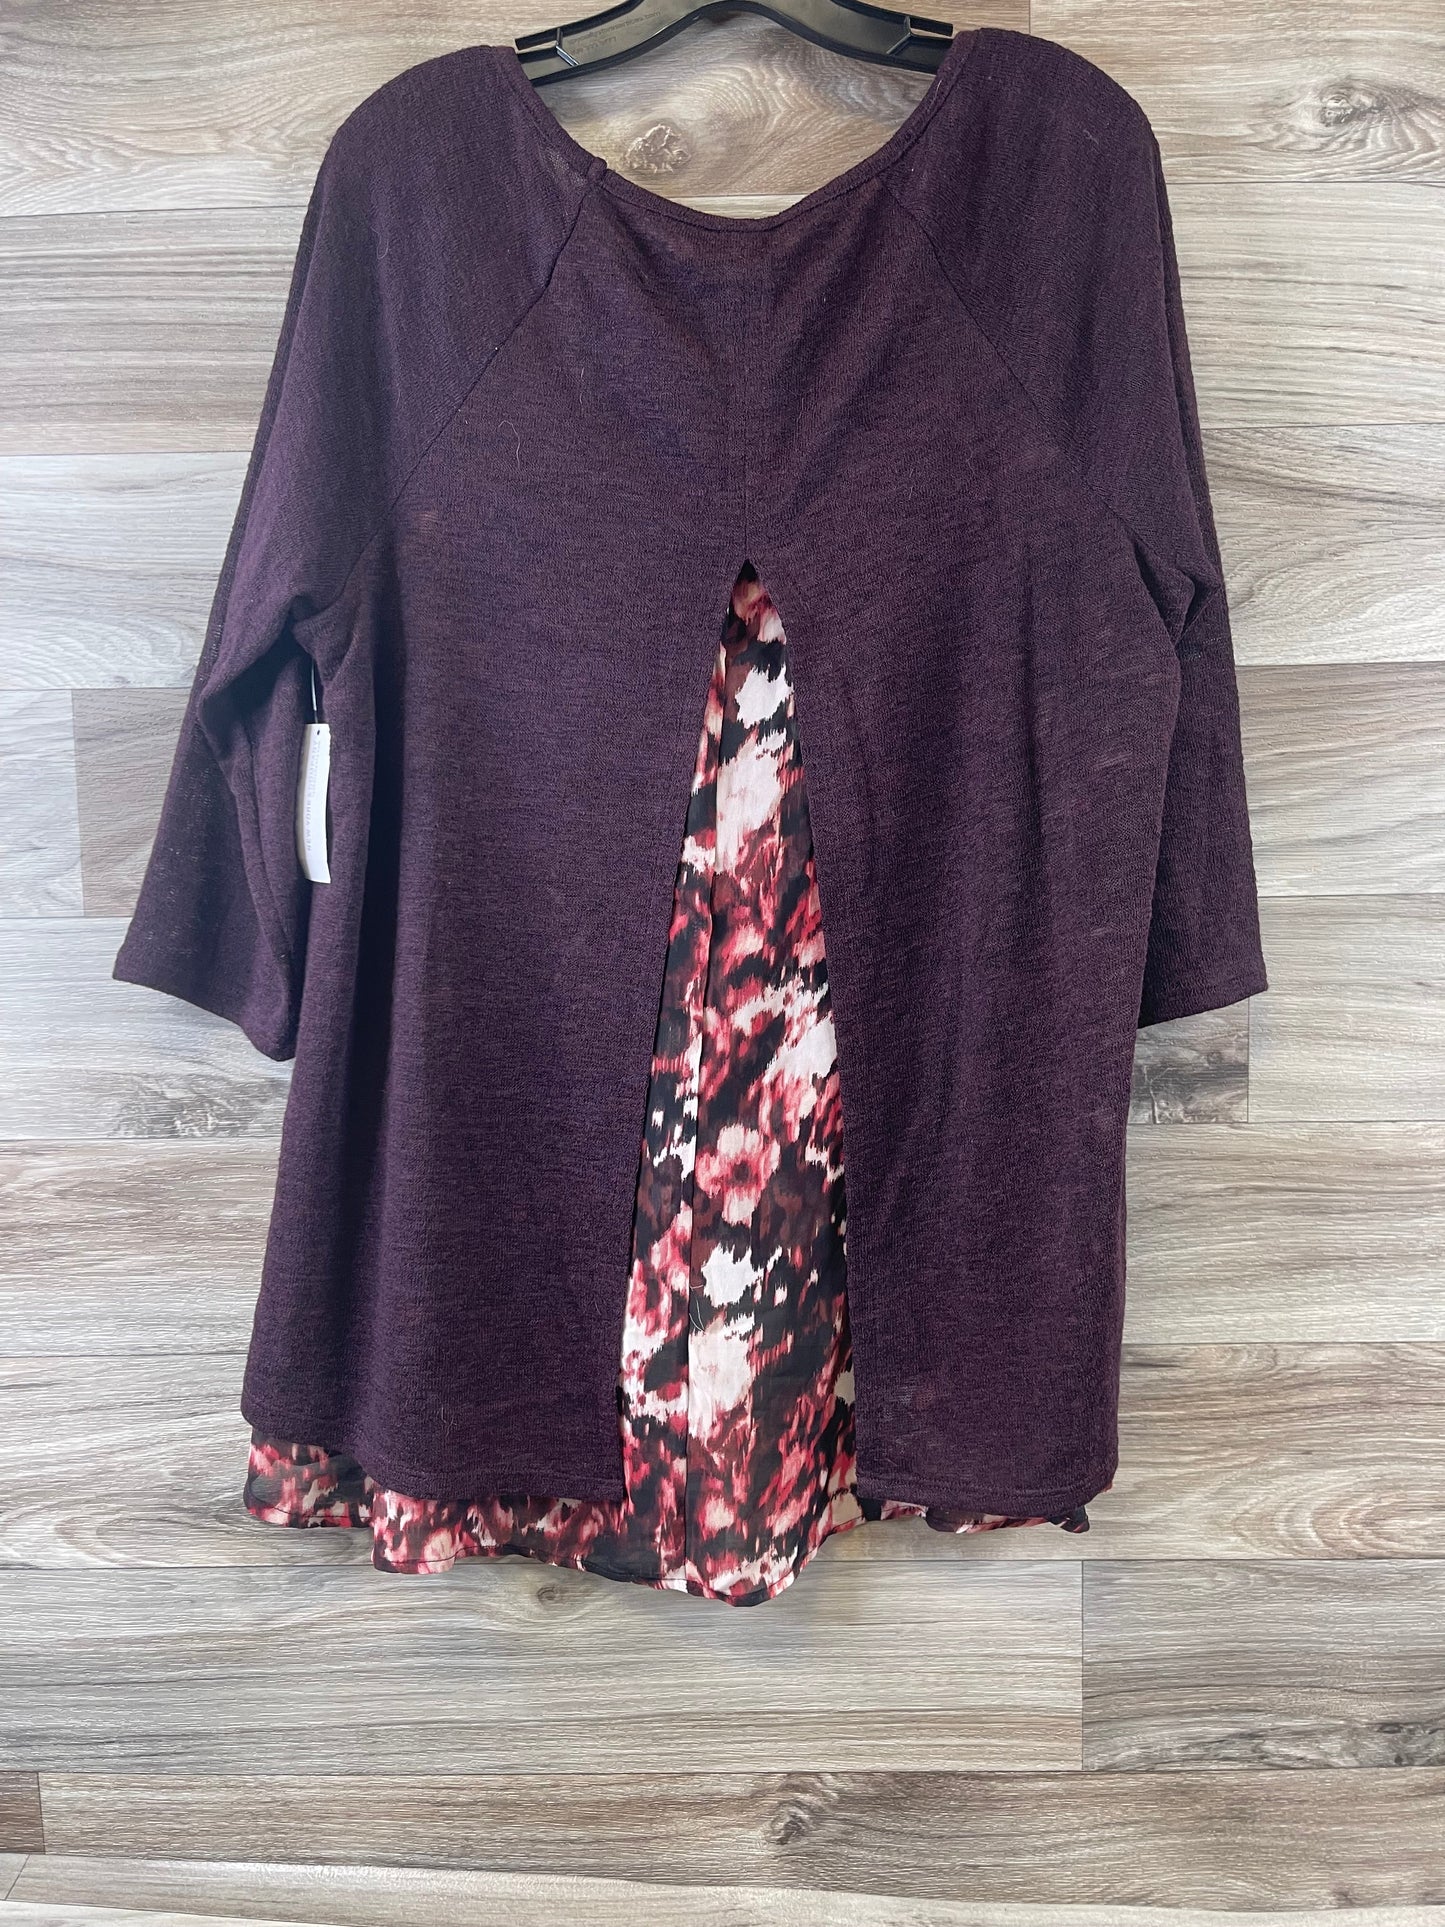 Purple & Red Top 3/4 Sleeve New York And Co, Size Xl